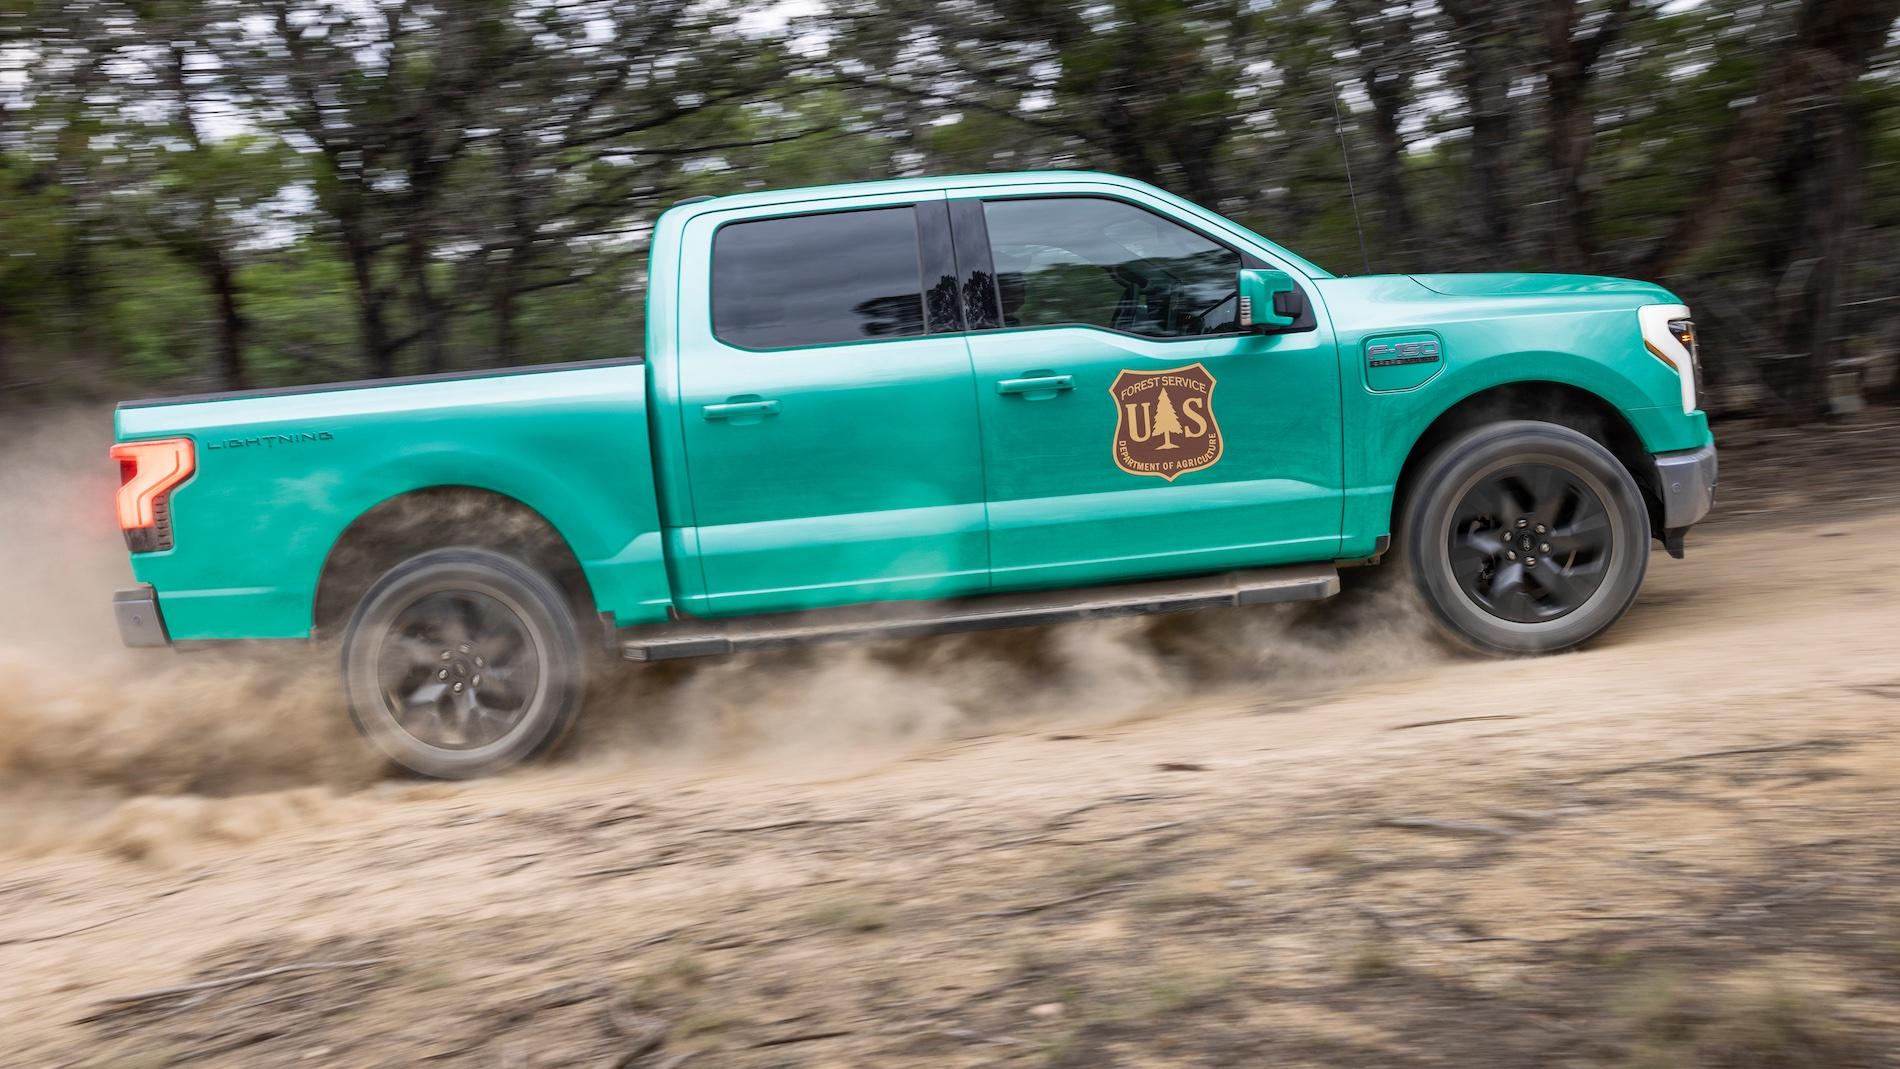 Ford F-150 Lightning US Forest Service is transitioning 17,000 ICE vehicles to EV -- starting with small fleet of F-150 Lightning [WARNING: NO POLITICS] 81013e889447b8f2ef2165b62fdf818c